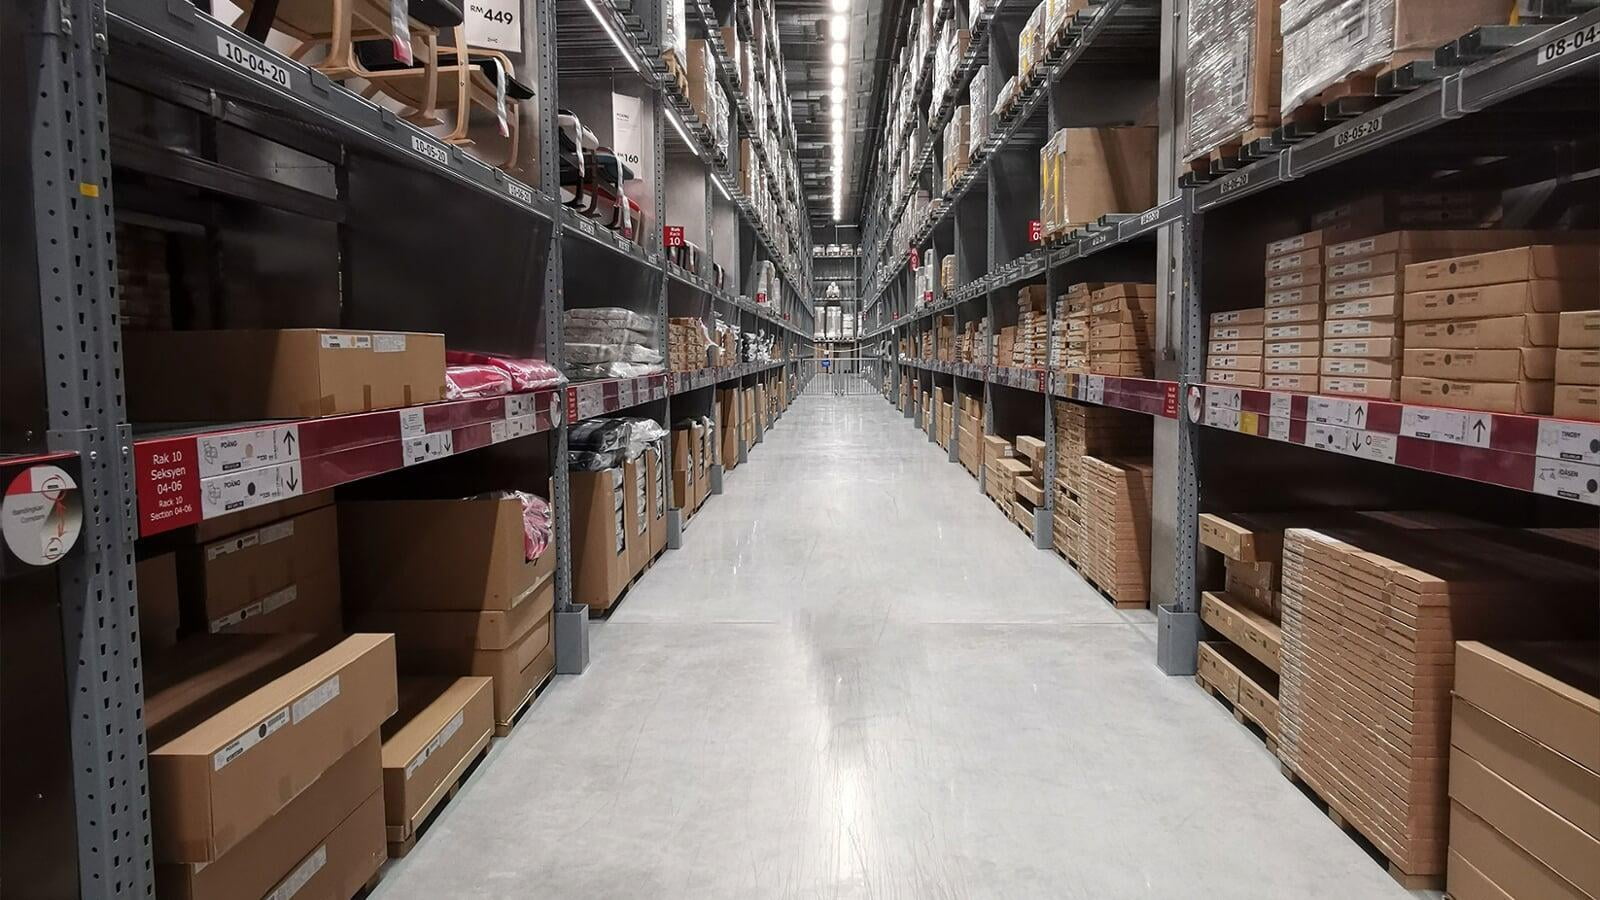 The Amazon Set-Up: Is Amazon’s Fulfillment Process Worth the Cost?